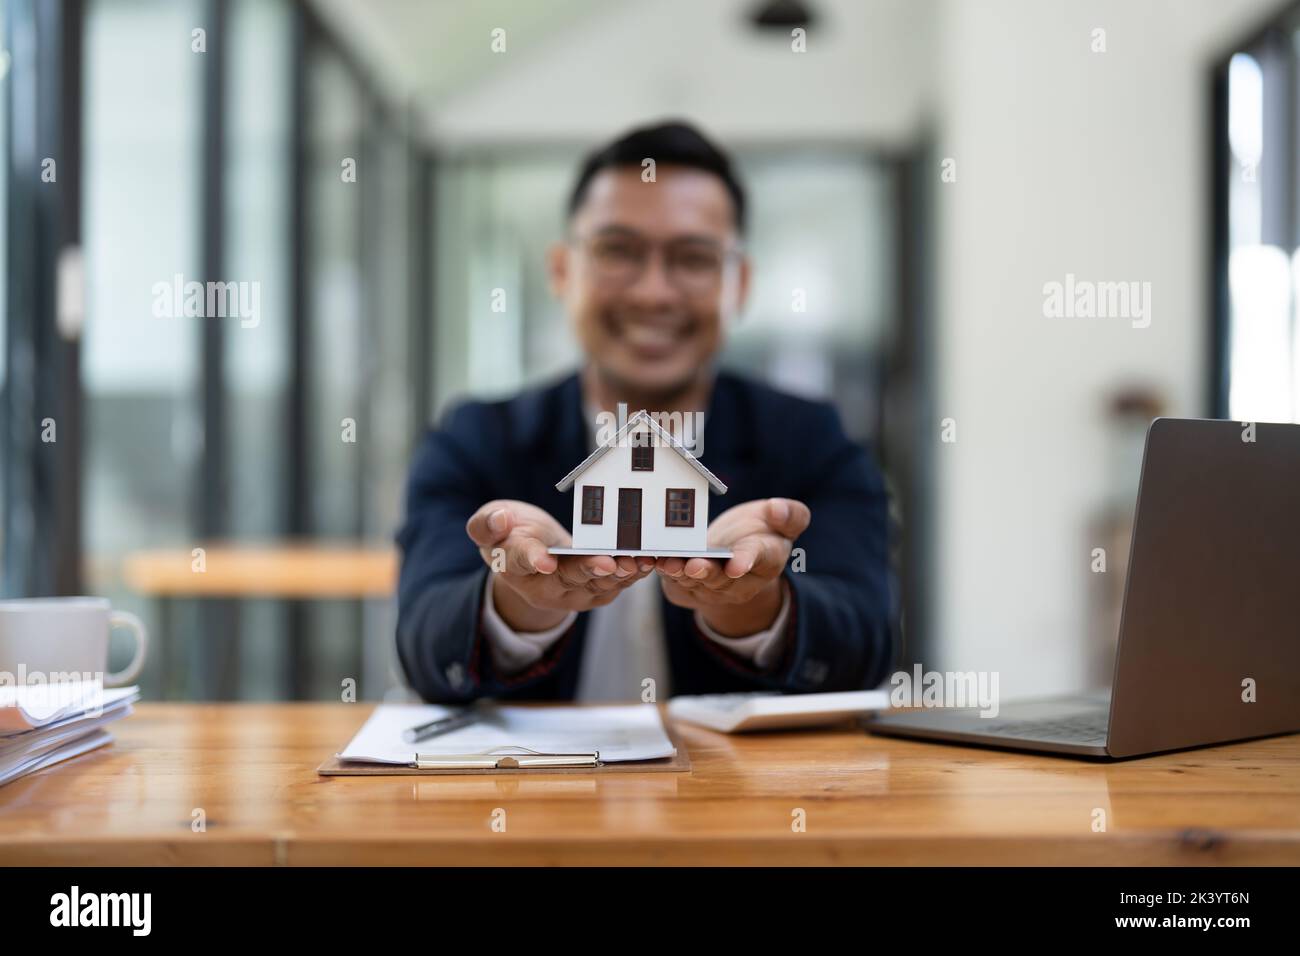 Close up view of young man holding house model. Property insurance and real estate concept. Stock Photo